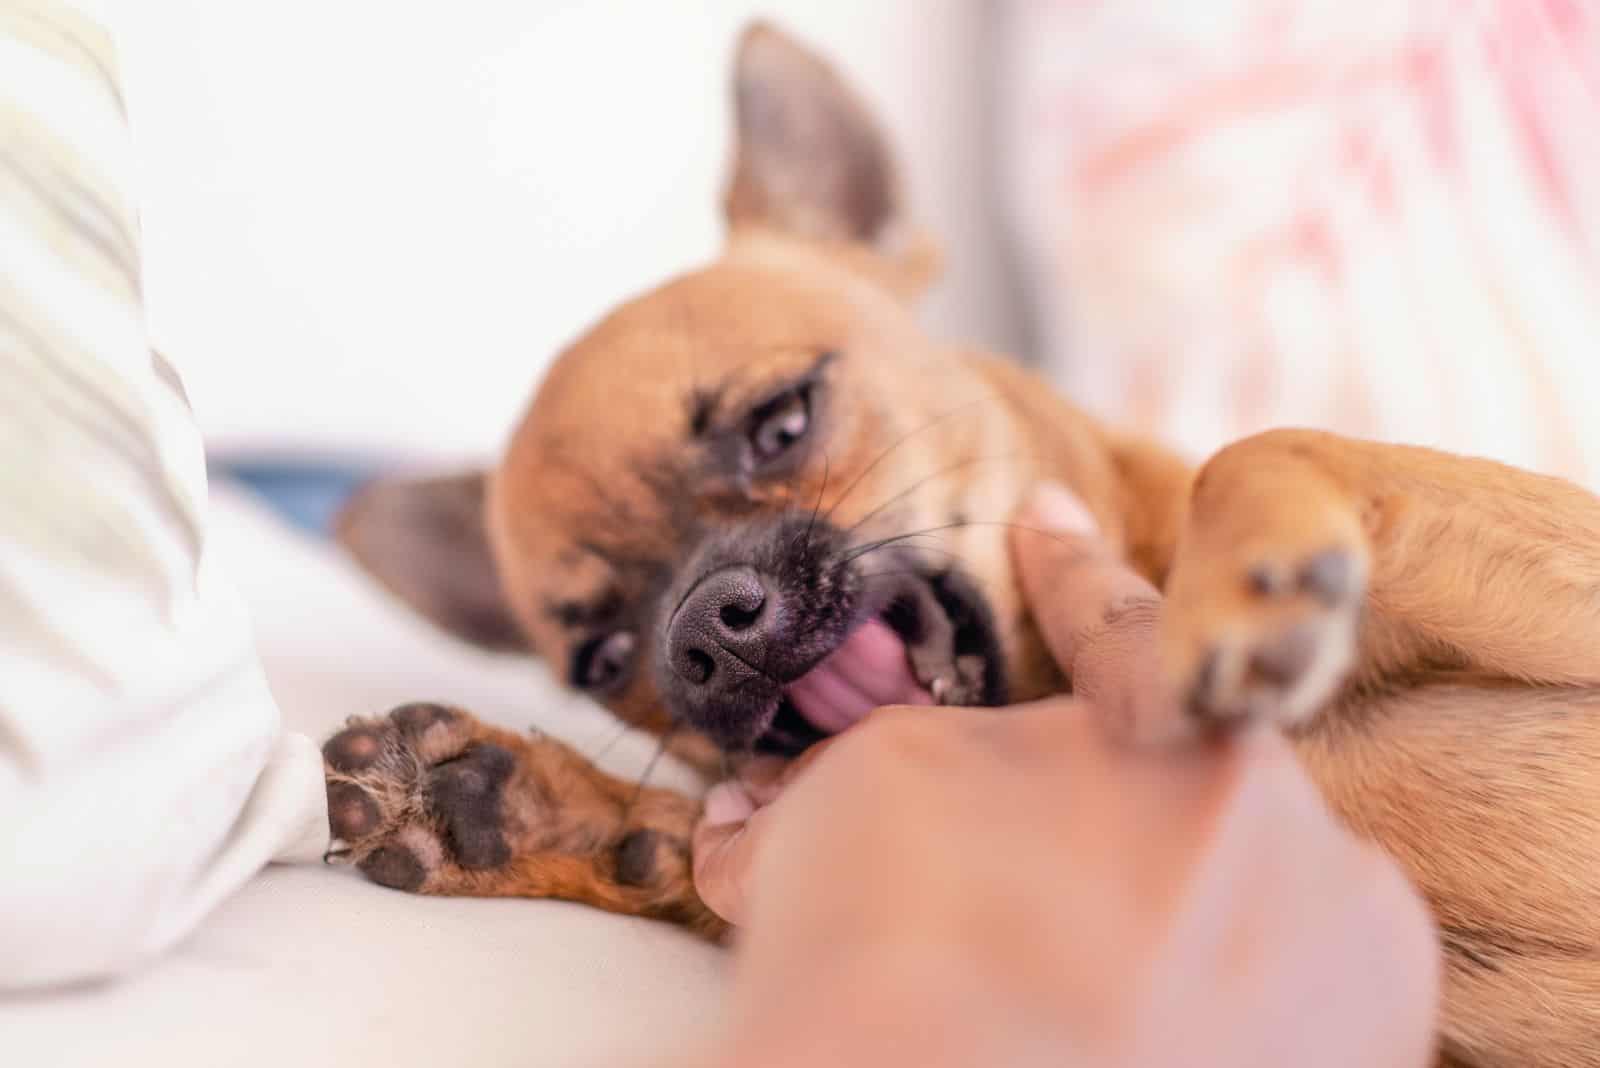 How To Punish A Chihuahua For Biting? 3 Tips